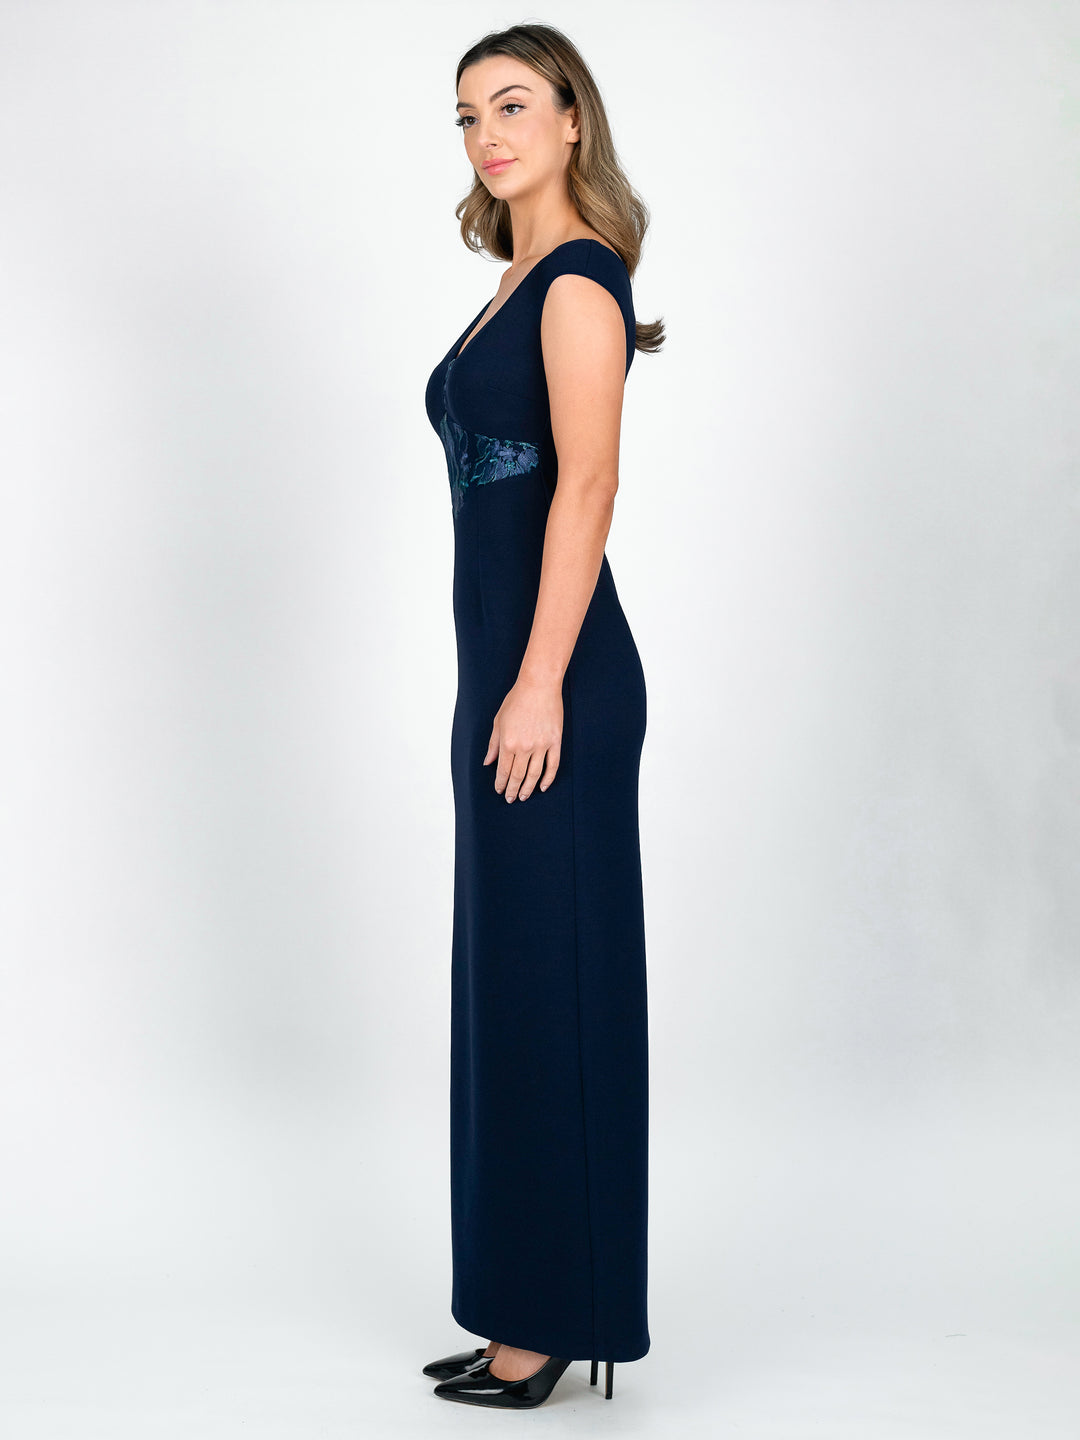 Lisa Barron navy and teal green cap sleeve full length evening gown with v-neck and lace accent side